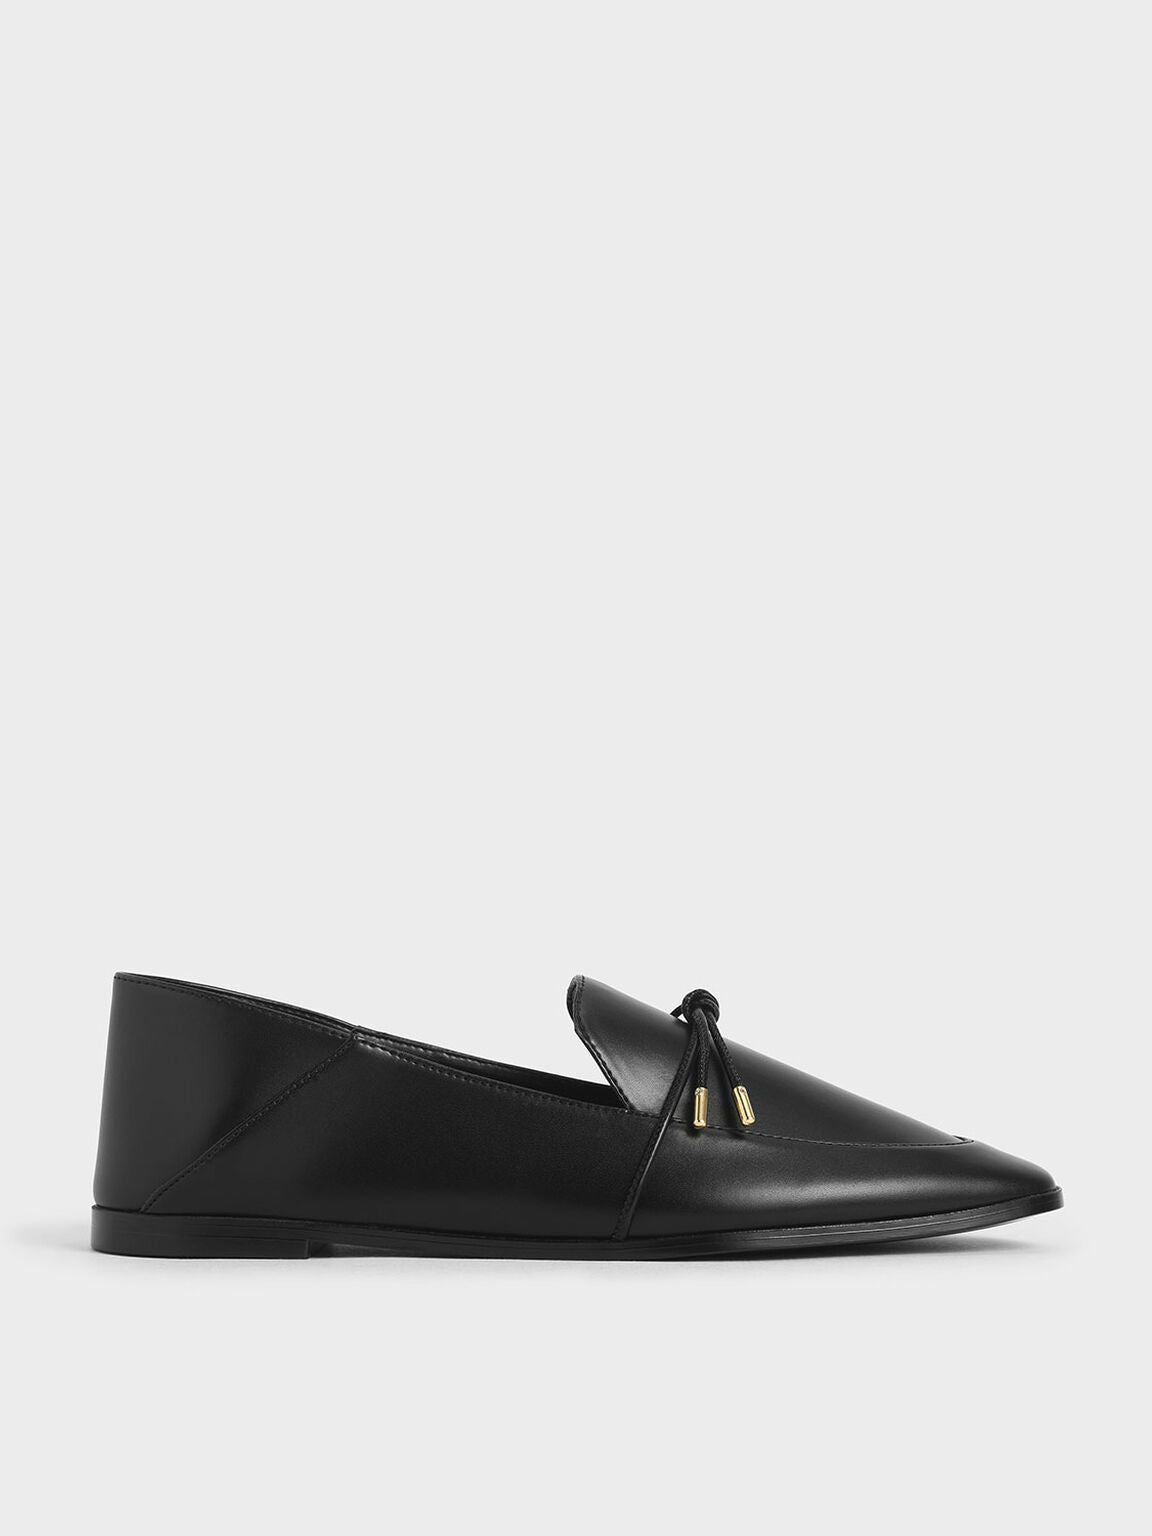 Bow-Tie Loafers